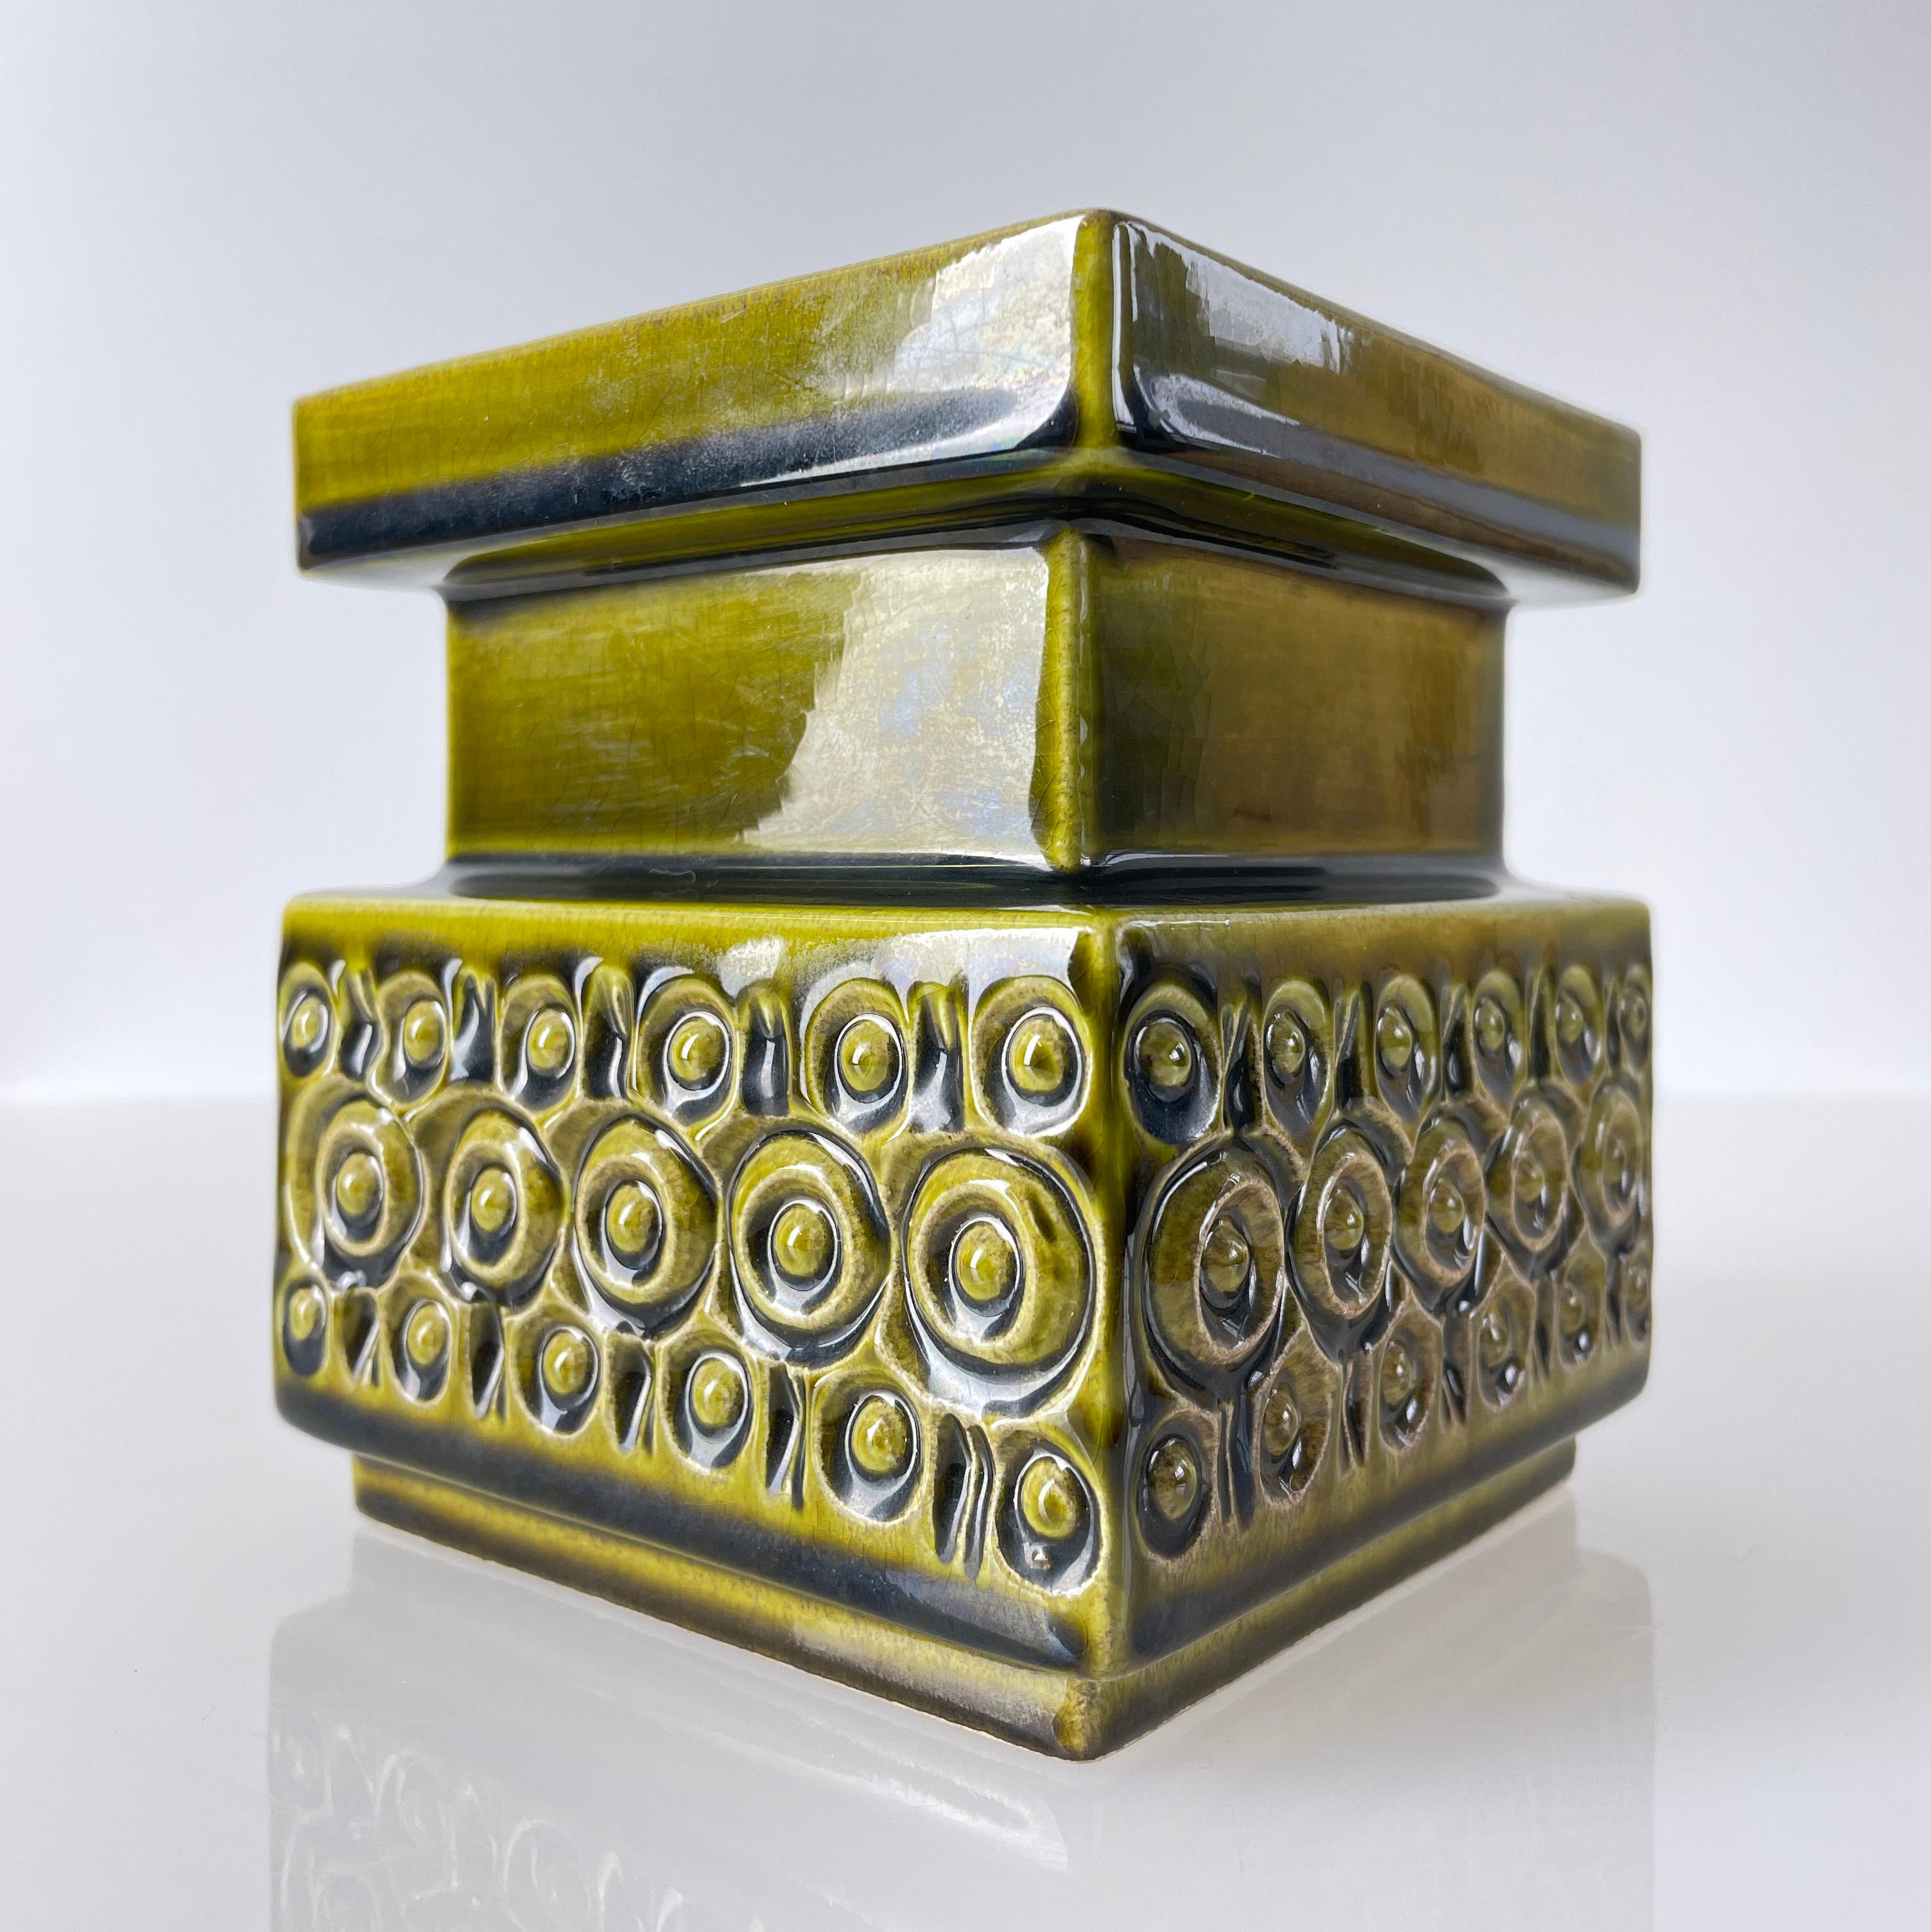 Decorative ceramic candle holder produced by JK Kunstkeramik (W.Germany) in the late 60's to mid-1970s. Features a relief pattern with a olive green glaze. Maufacturer's mark on base.